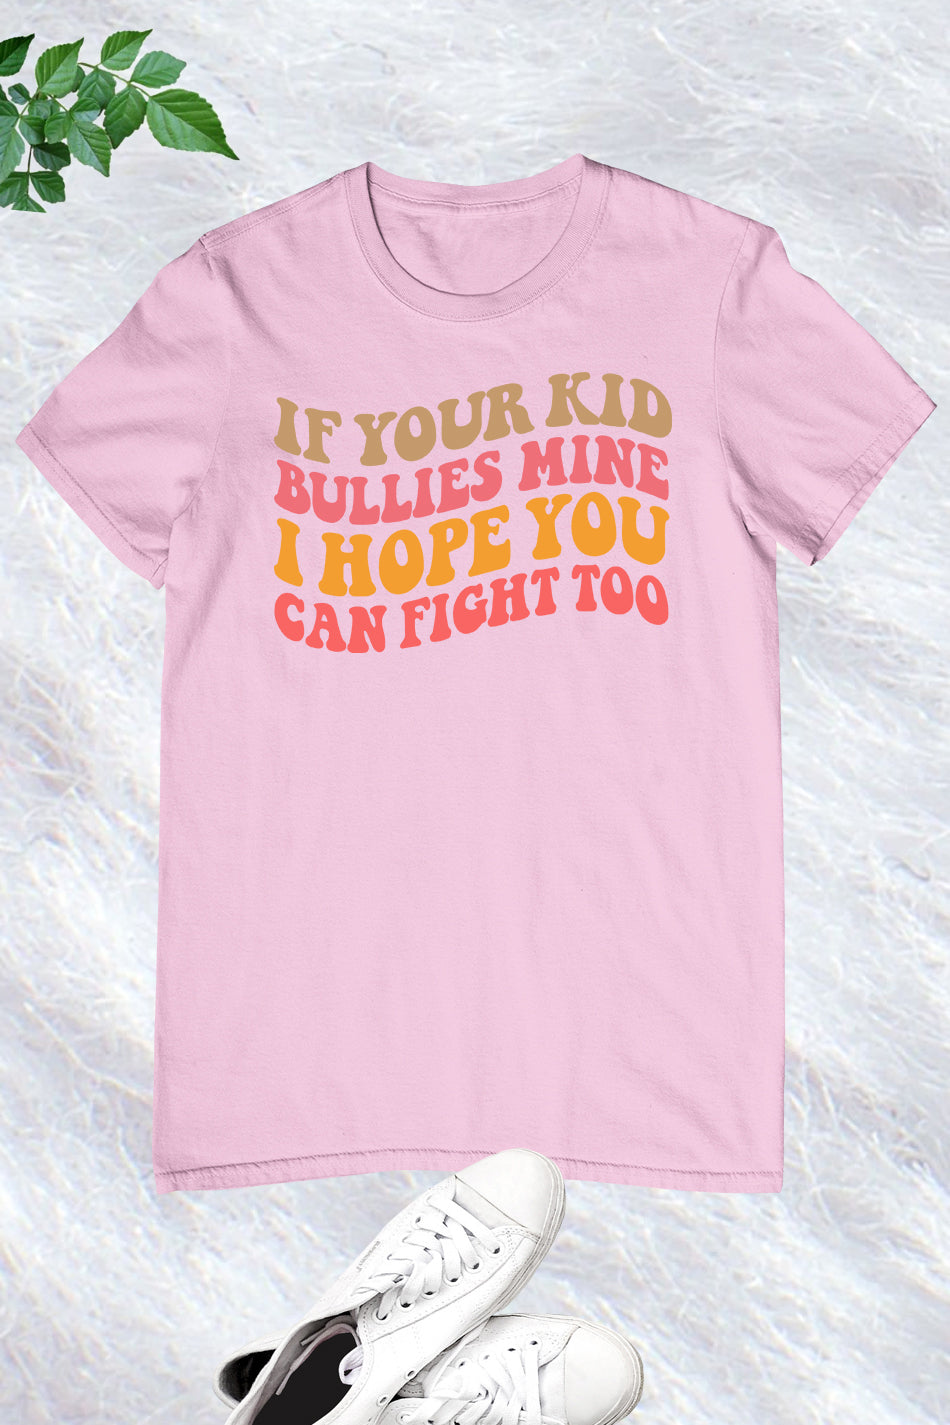 If Your Kids Bullies Mine I Hope You can Fight Too Shirt